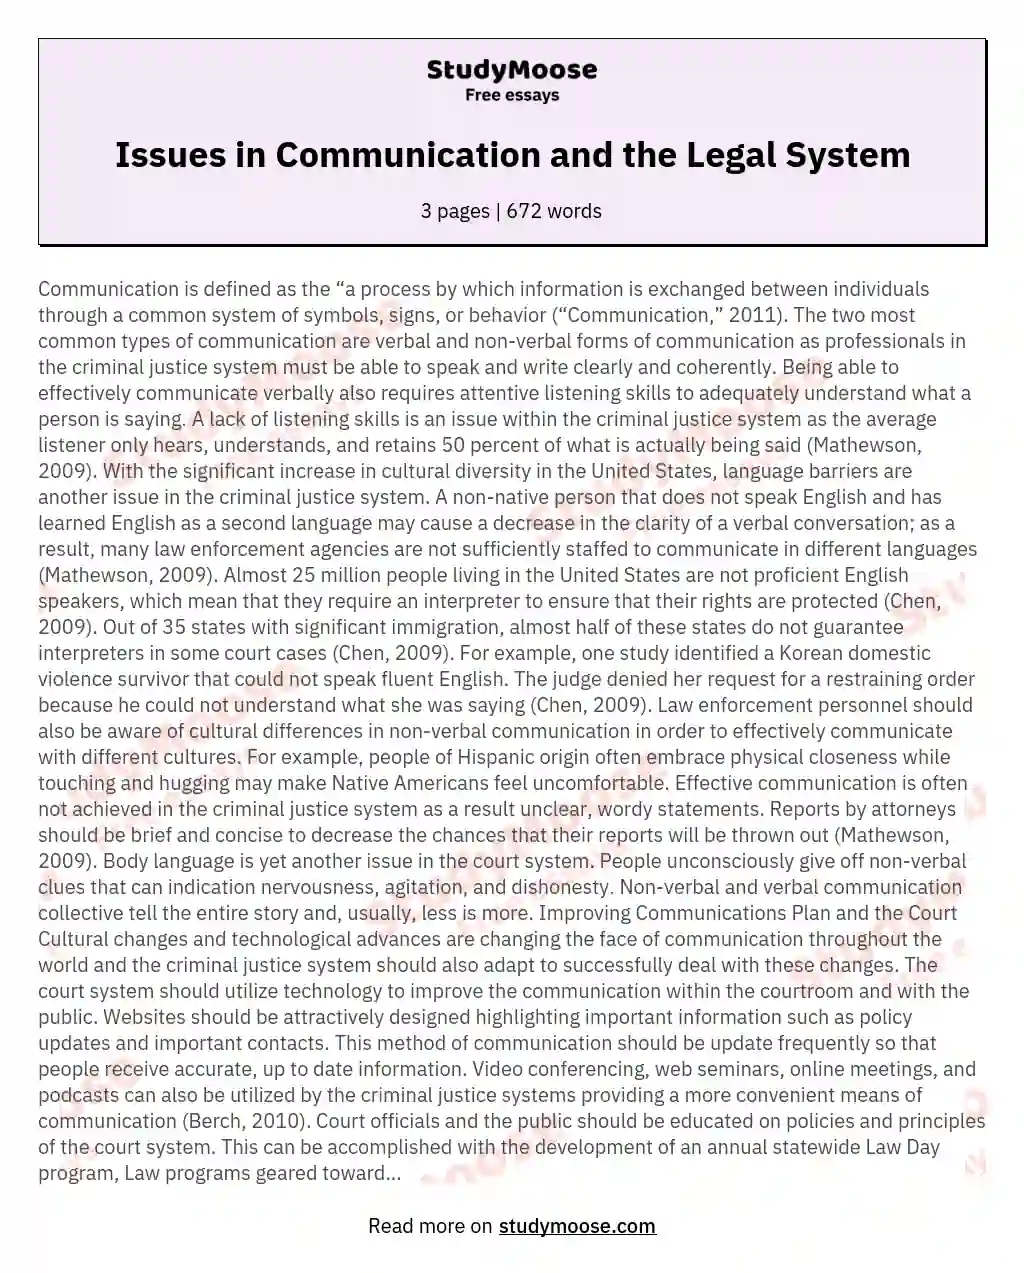 Issues in Communication and the Legal System essay